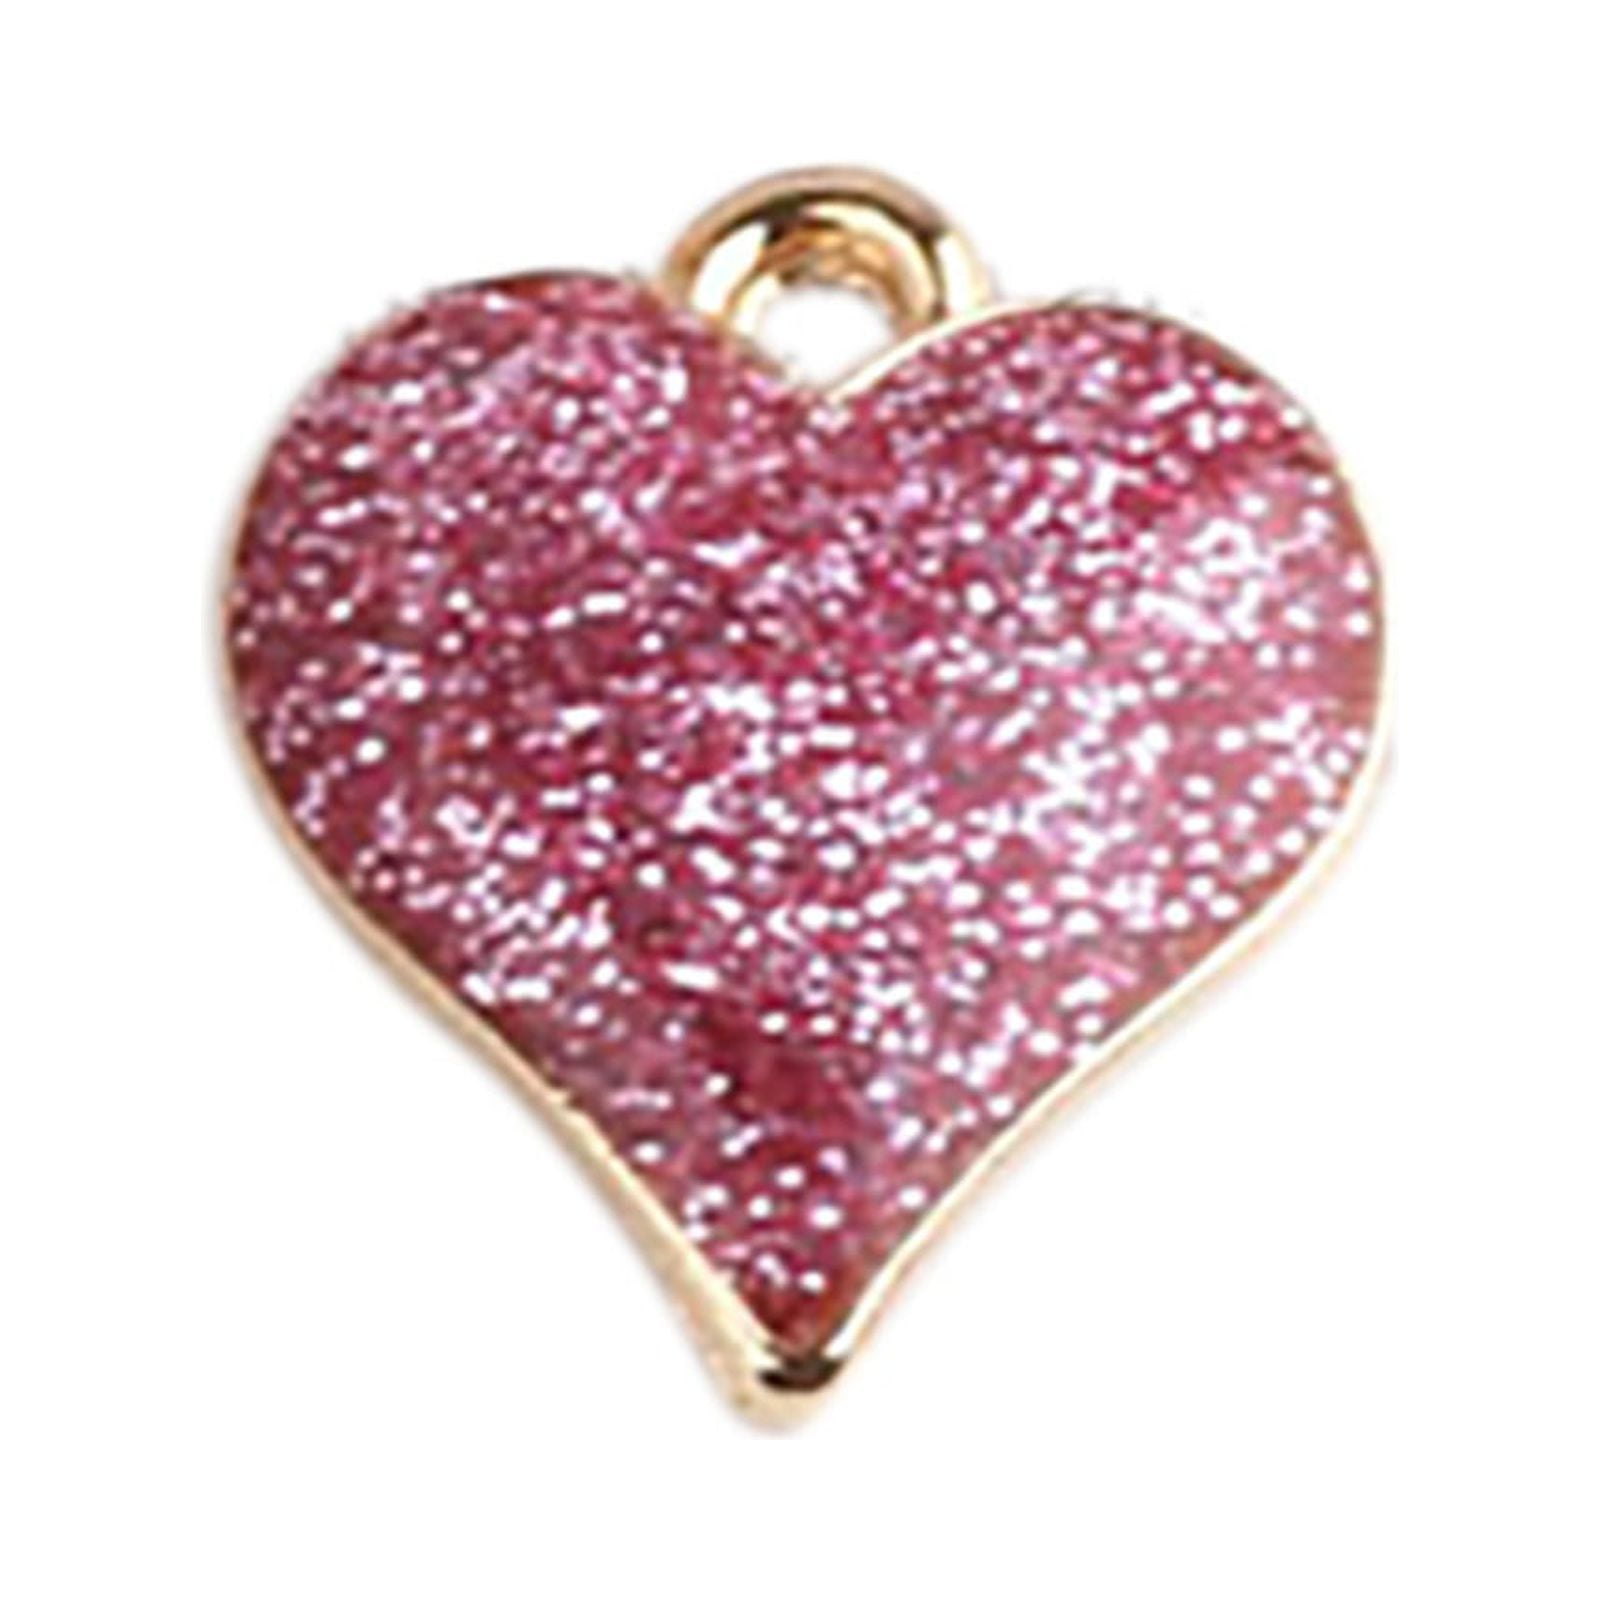  VOGUEKNOCK 30/45pcs Rhinestone Heart Charms for Jewelry Making  Pink Red Fuchsia Heart Charms for Valentines Day Necklace Bracelet Earring  Making DIY Jewelry Supply (45 hearts) (30 glitter style) : Arts, Crafts